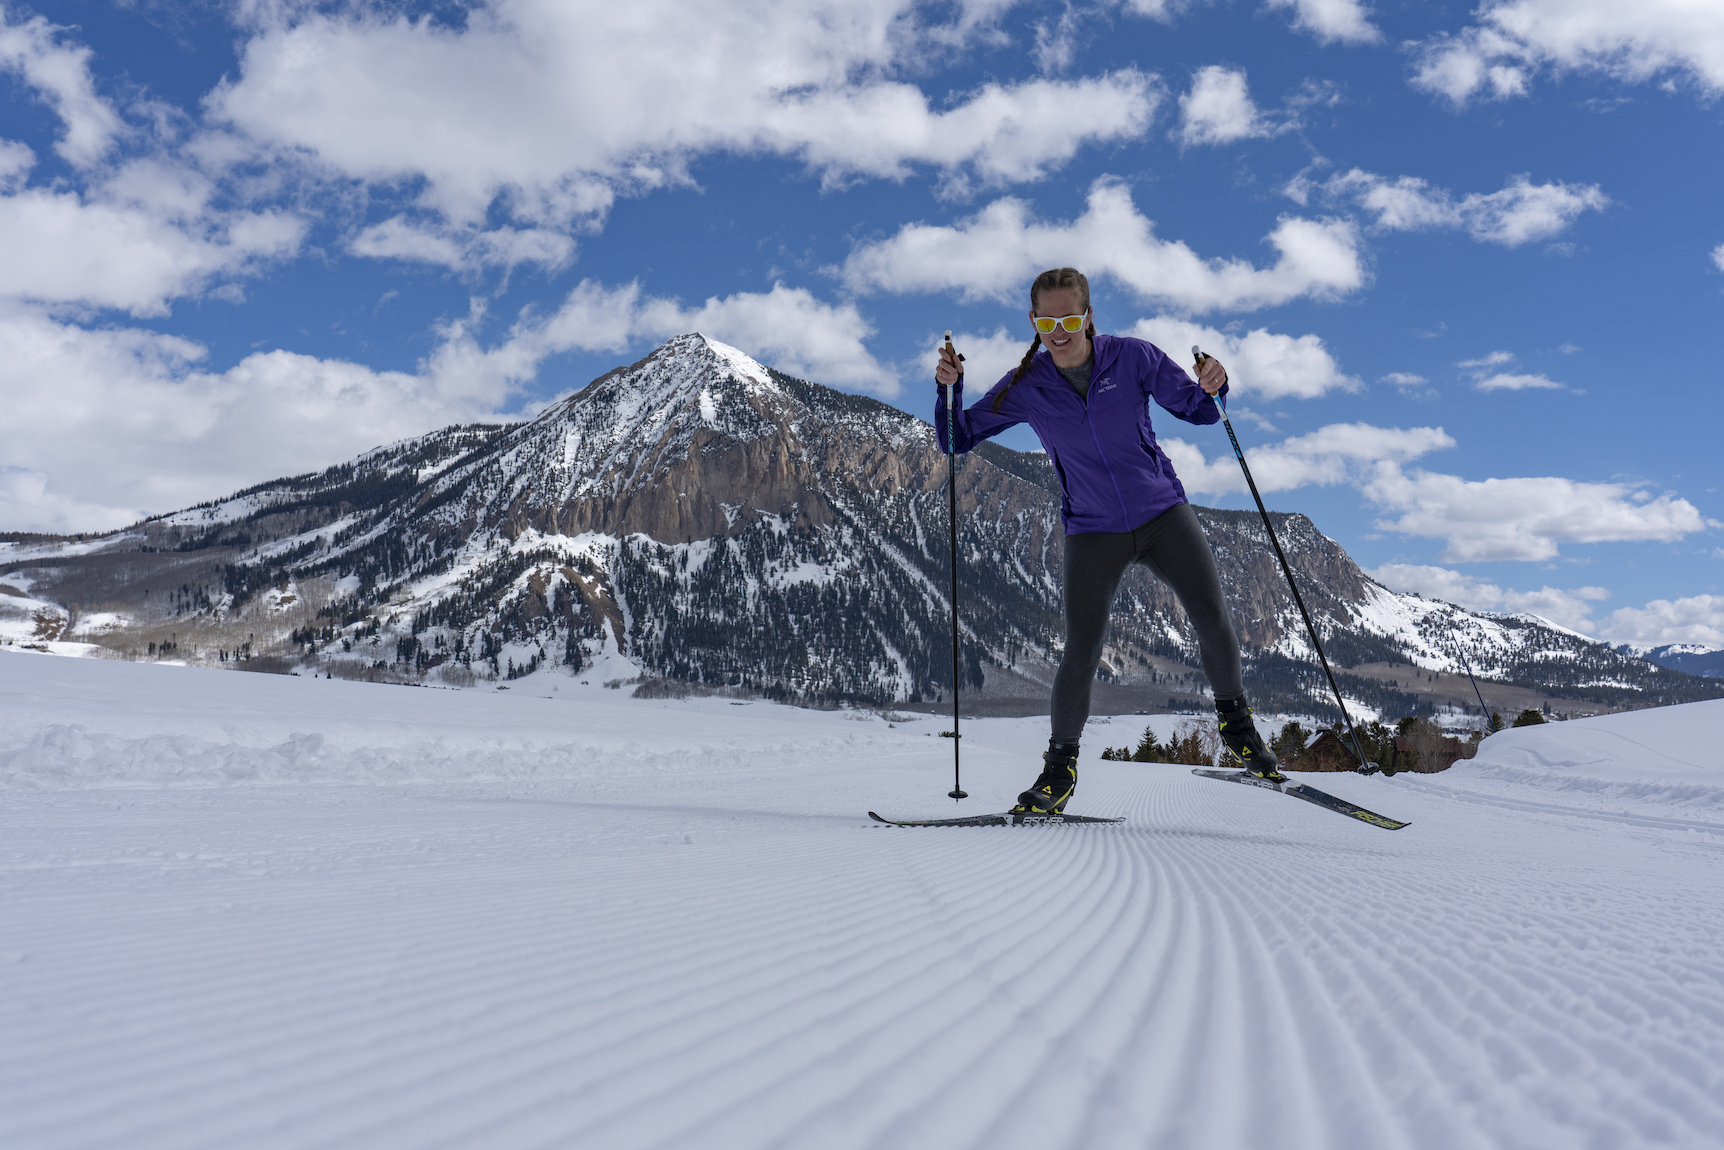 A person skis on skinny skis with a mountain peak in the background. Nordic Skiing Crested Butte